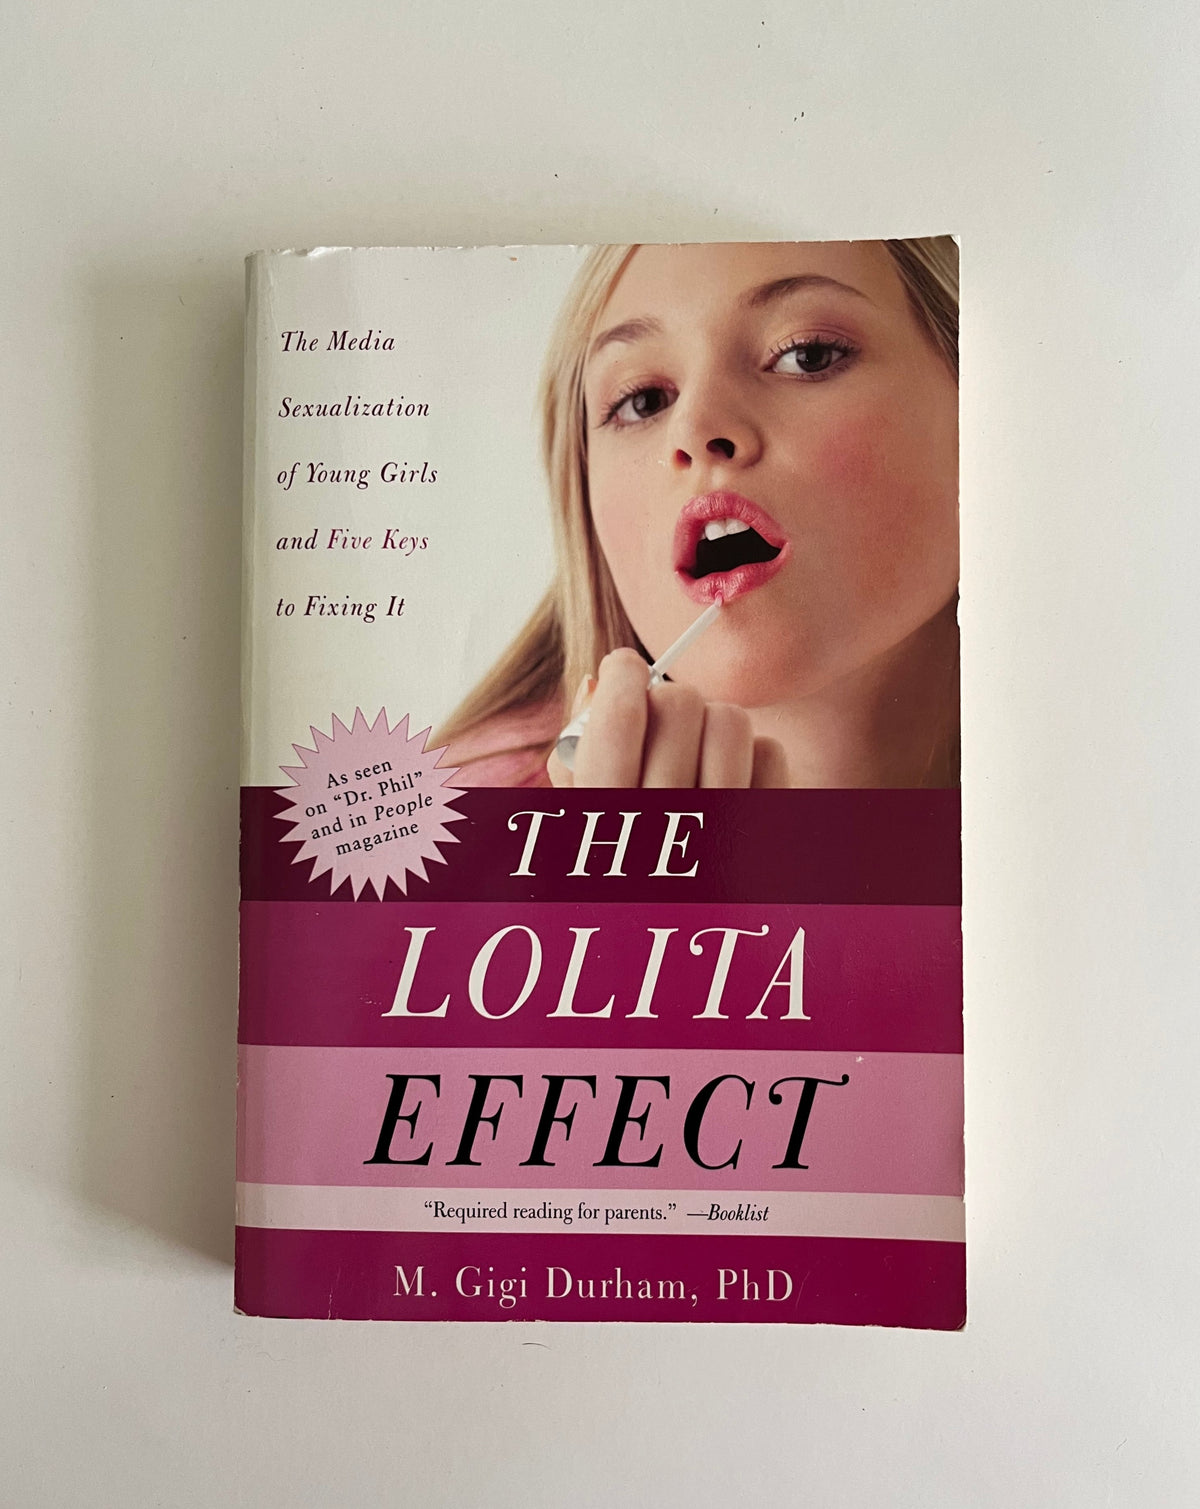 The Lolita Effect: The Media Sexualization of Young Girls and Five Keys to Fixing It by M. Gigi Durham